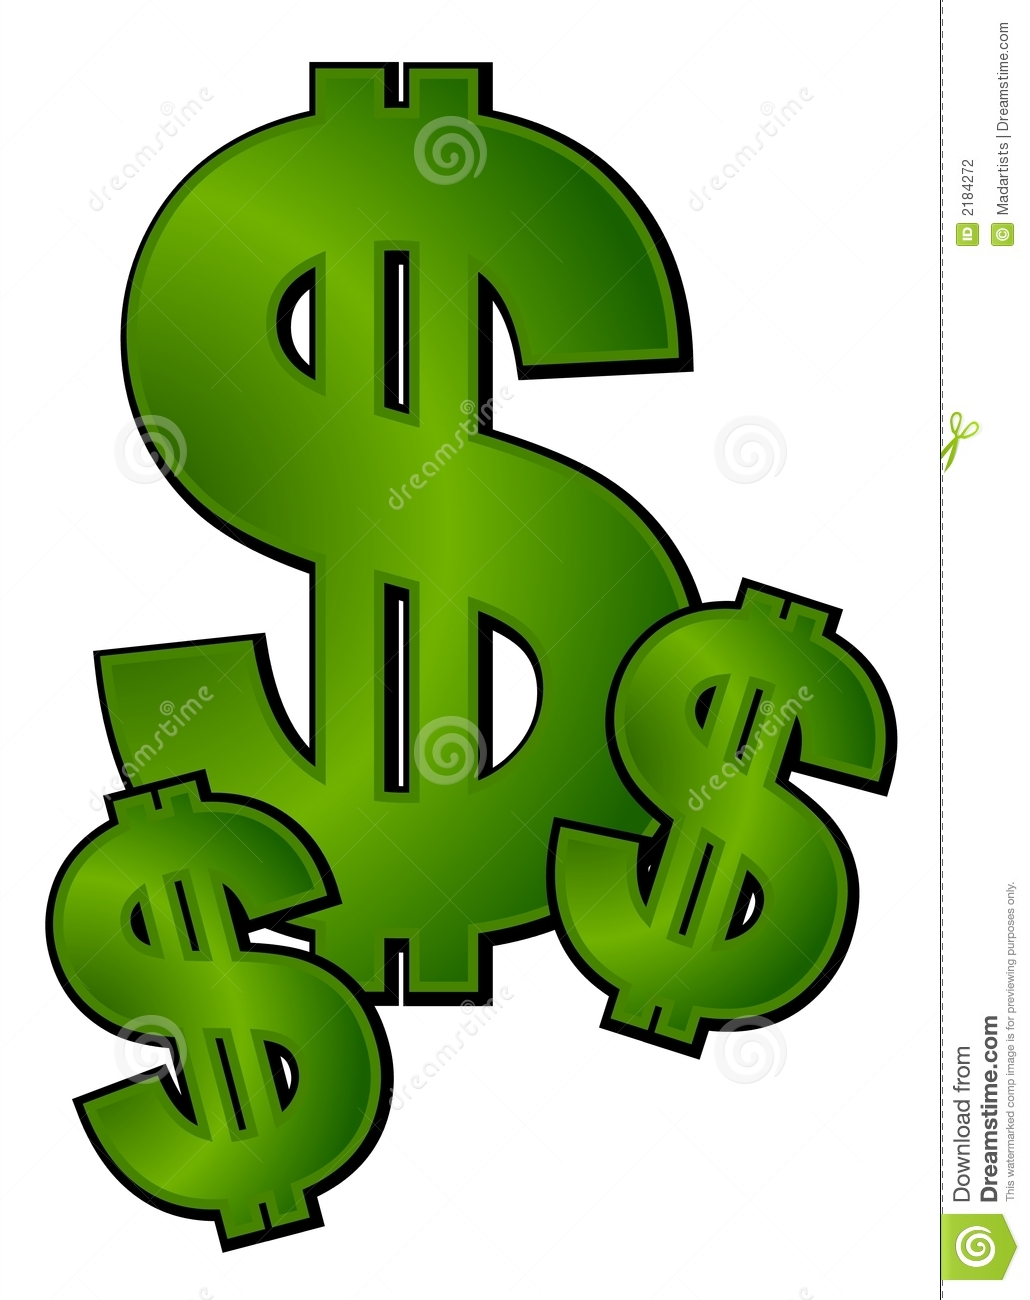 An Isolated Cash And Money Illustration With 3 Dollar Signs In Rich